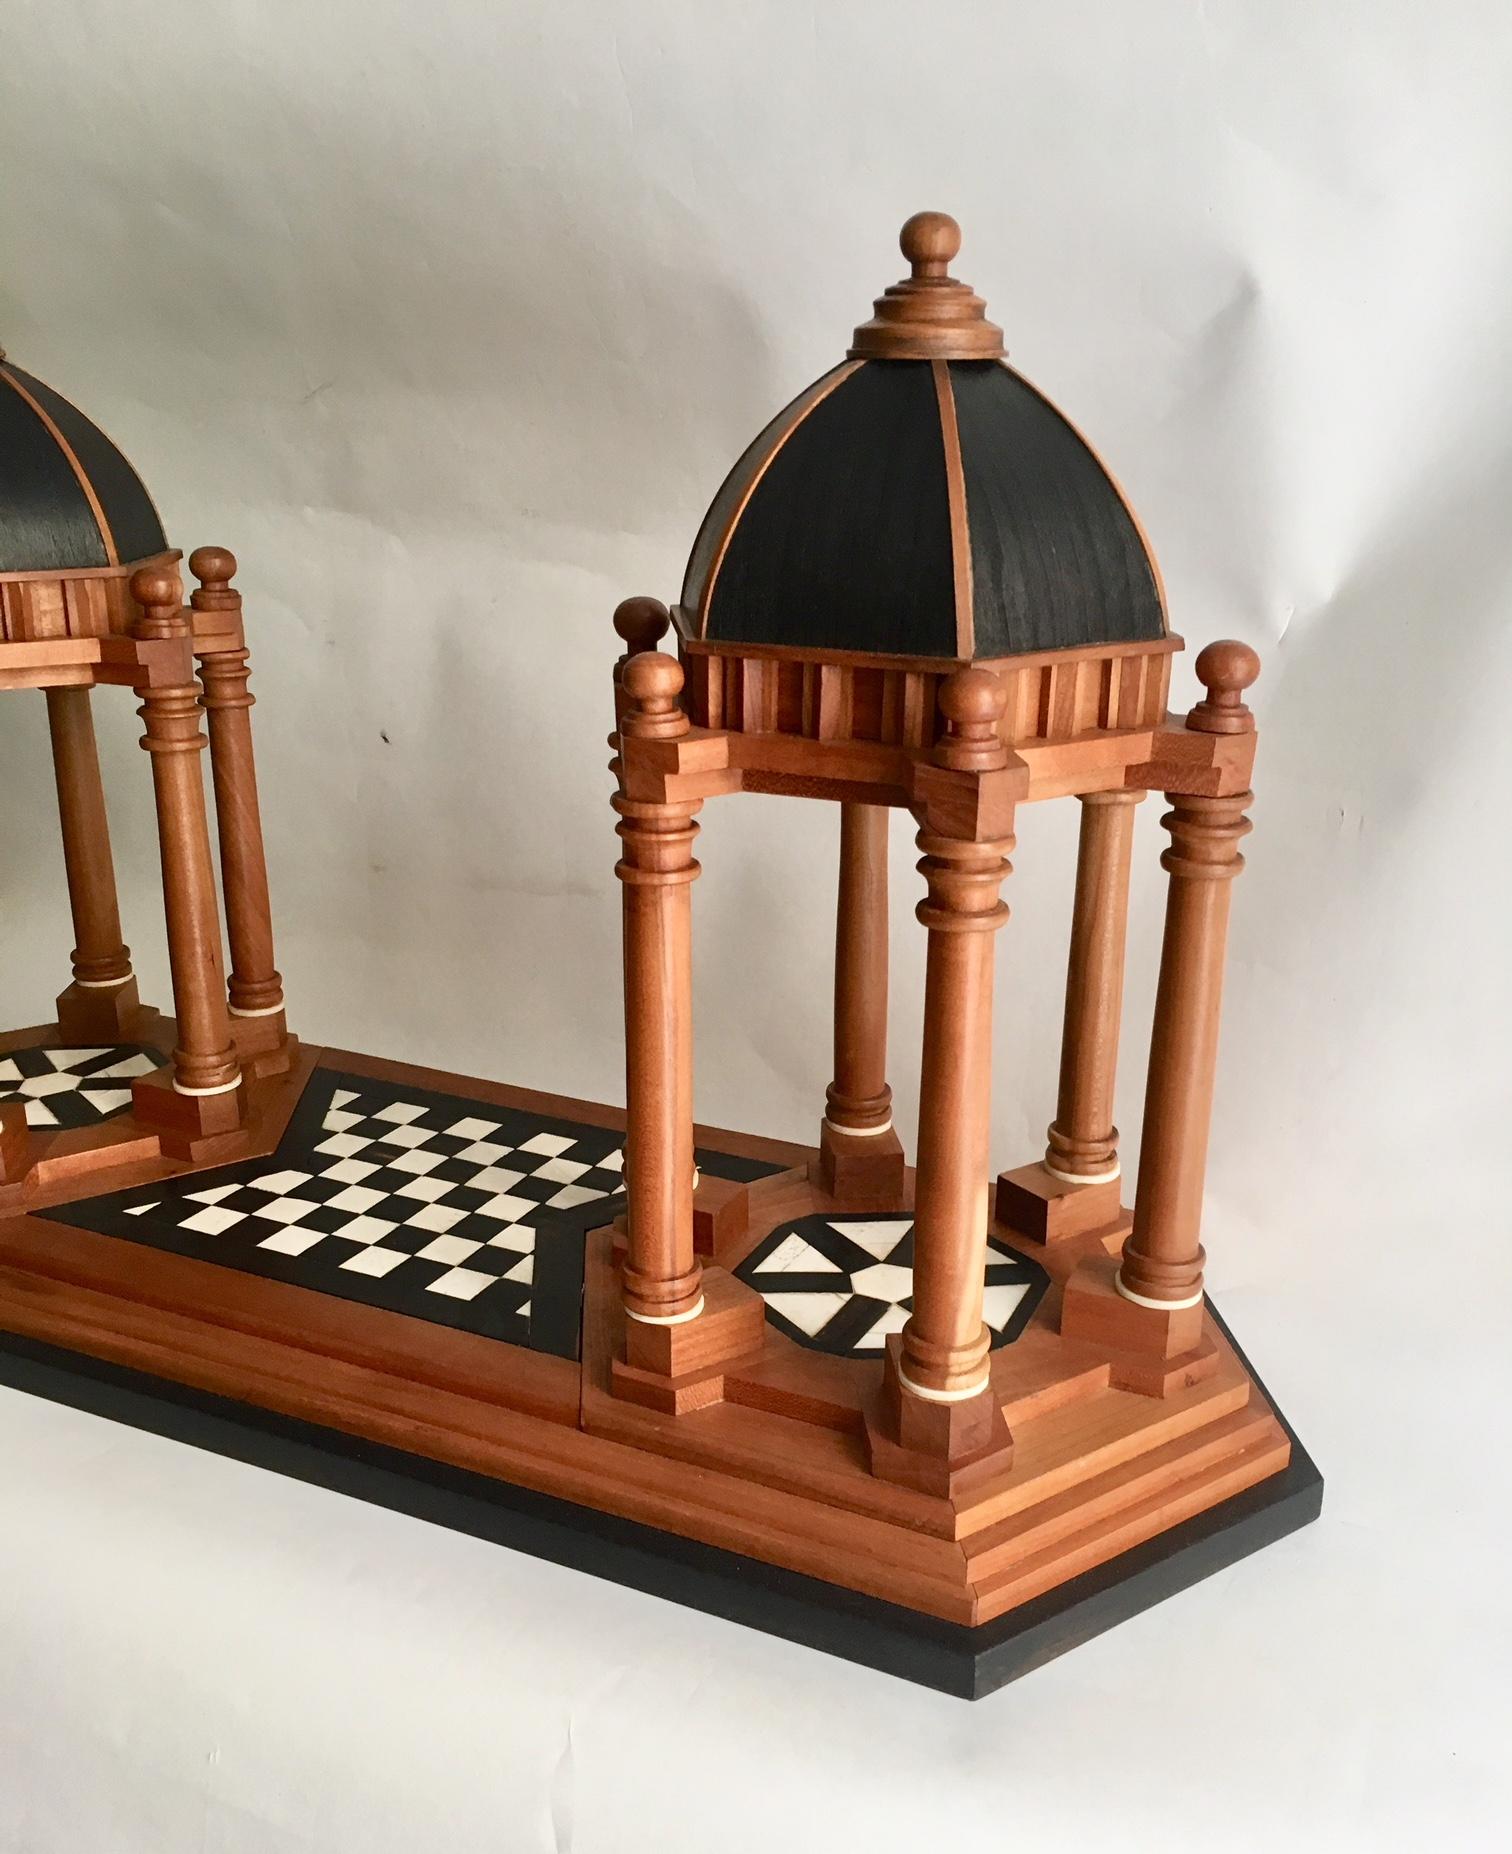 wooden architectural models for sale